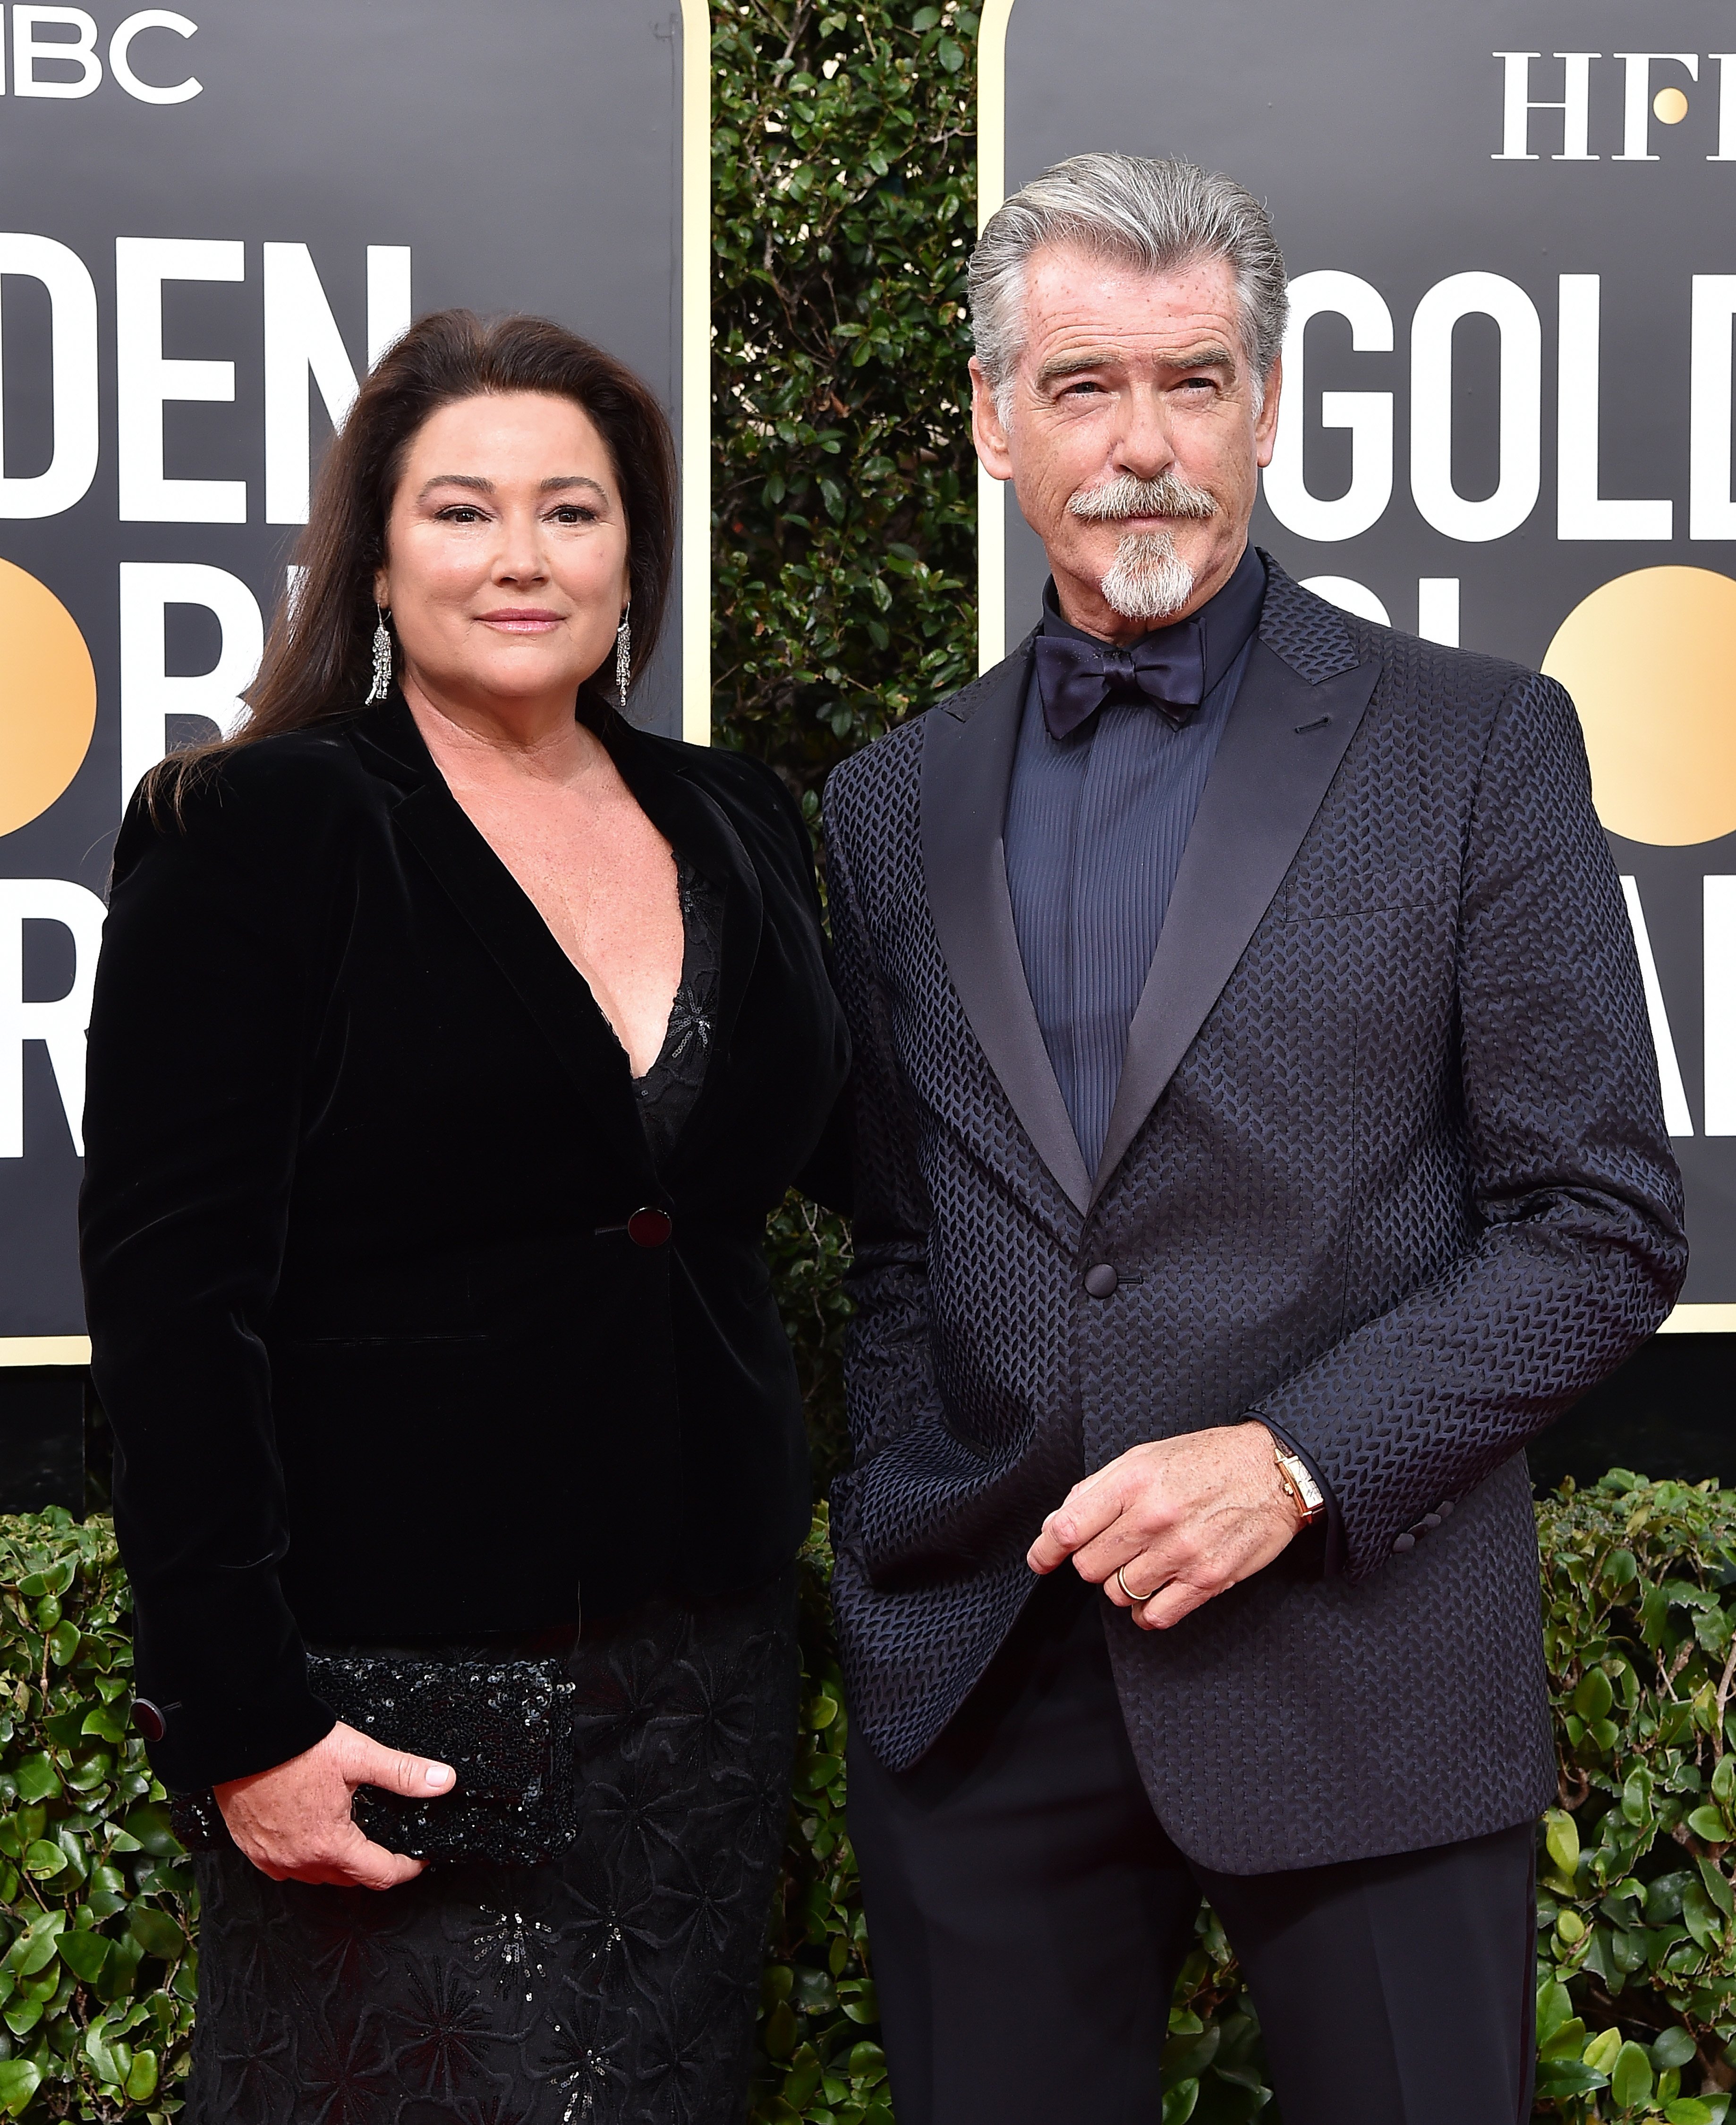 Keely Shaye Smith and Pierce Brosnan at the 77th Annual Golden Globe Awards held at The Beverly Hilton Hotel on January 05, 2020 in Beverly Hills, California. | Source: Getty Images